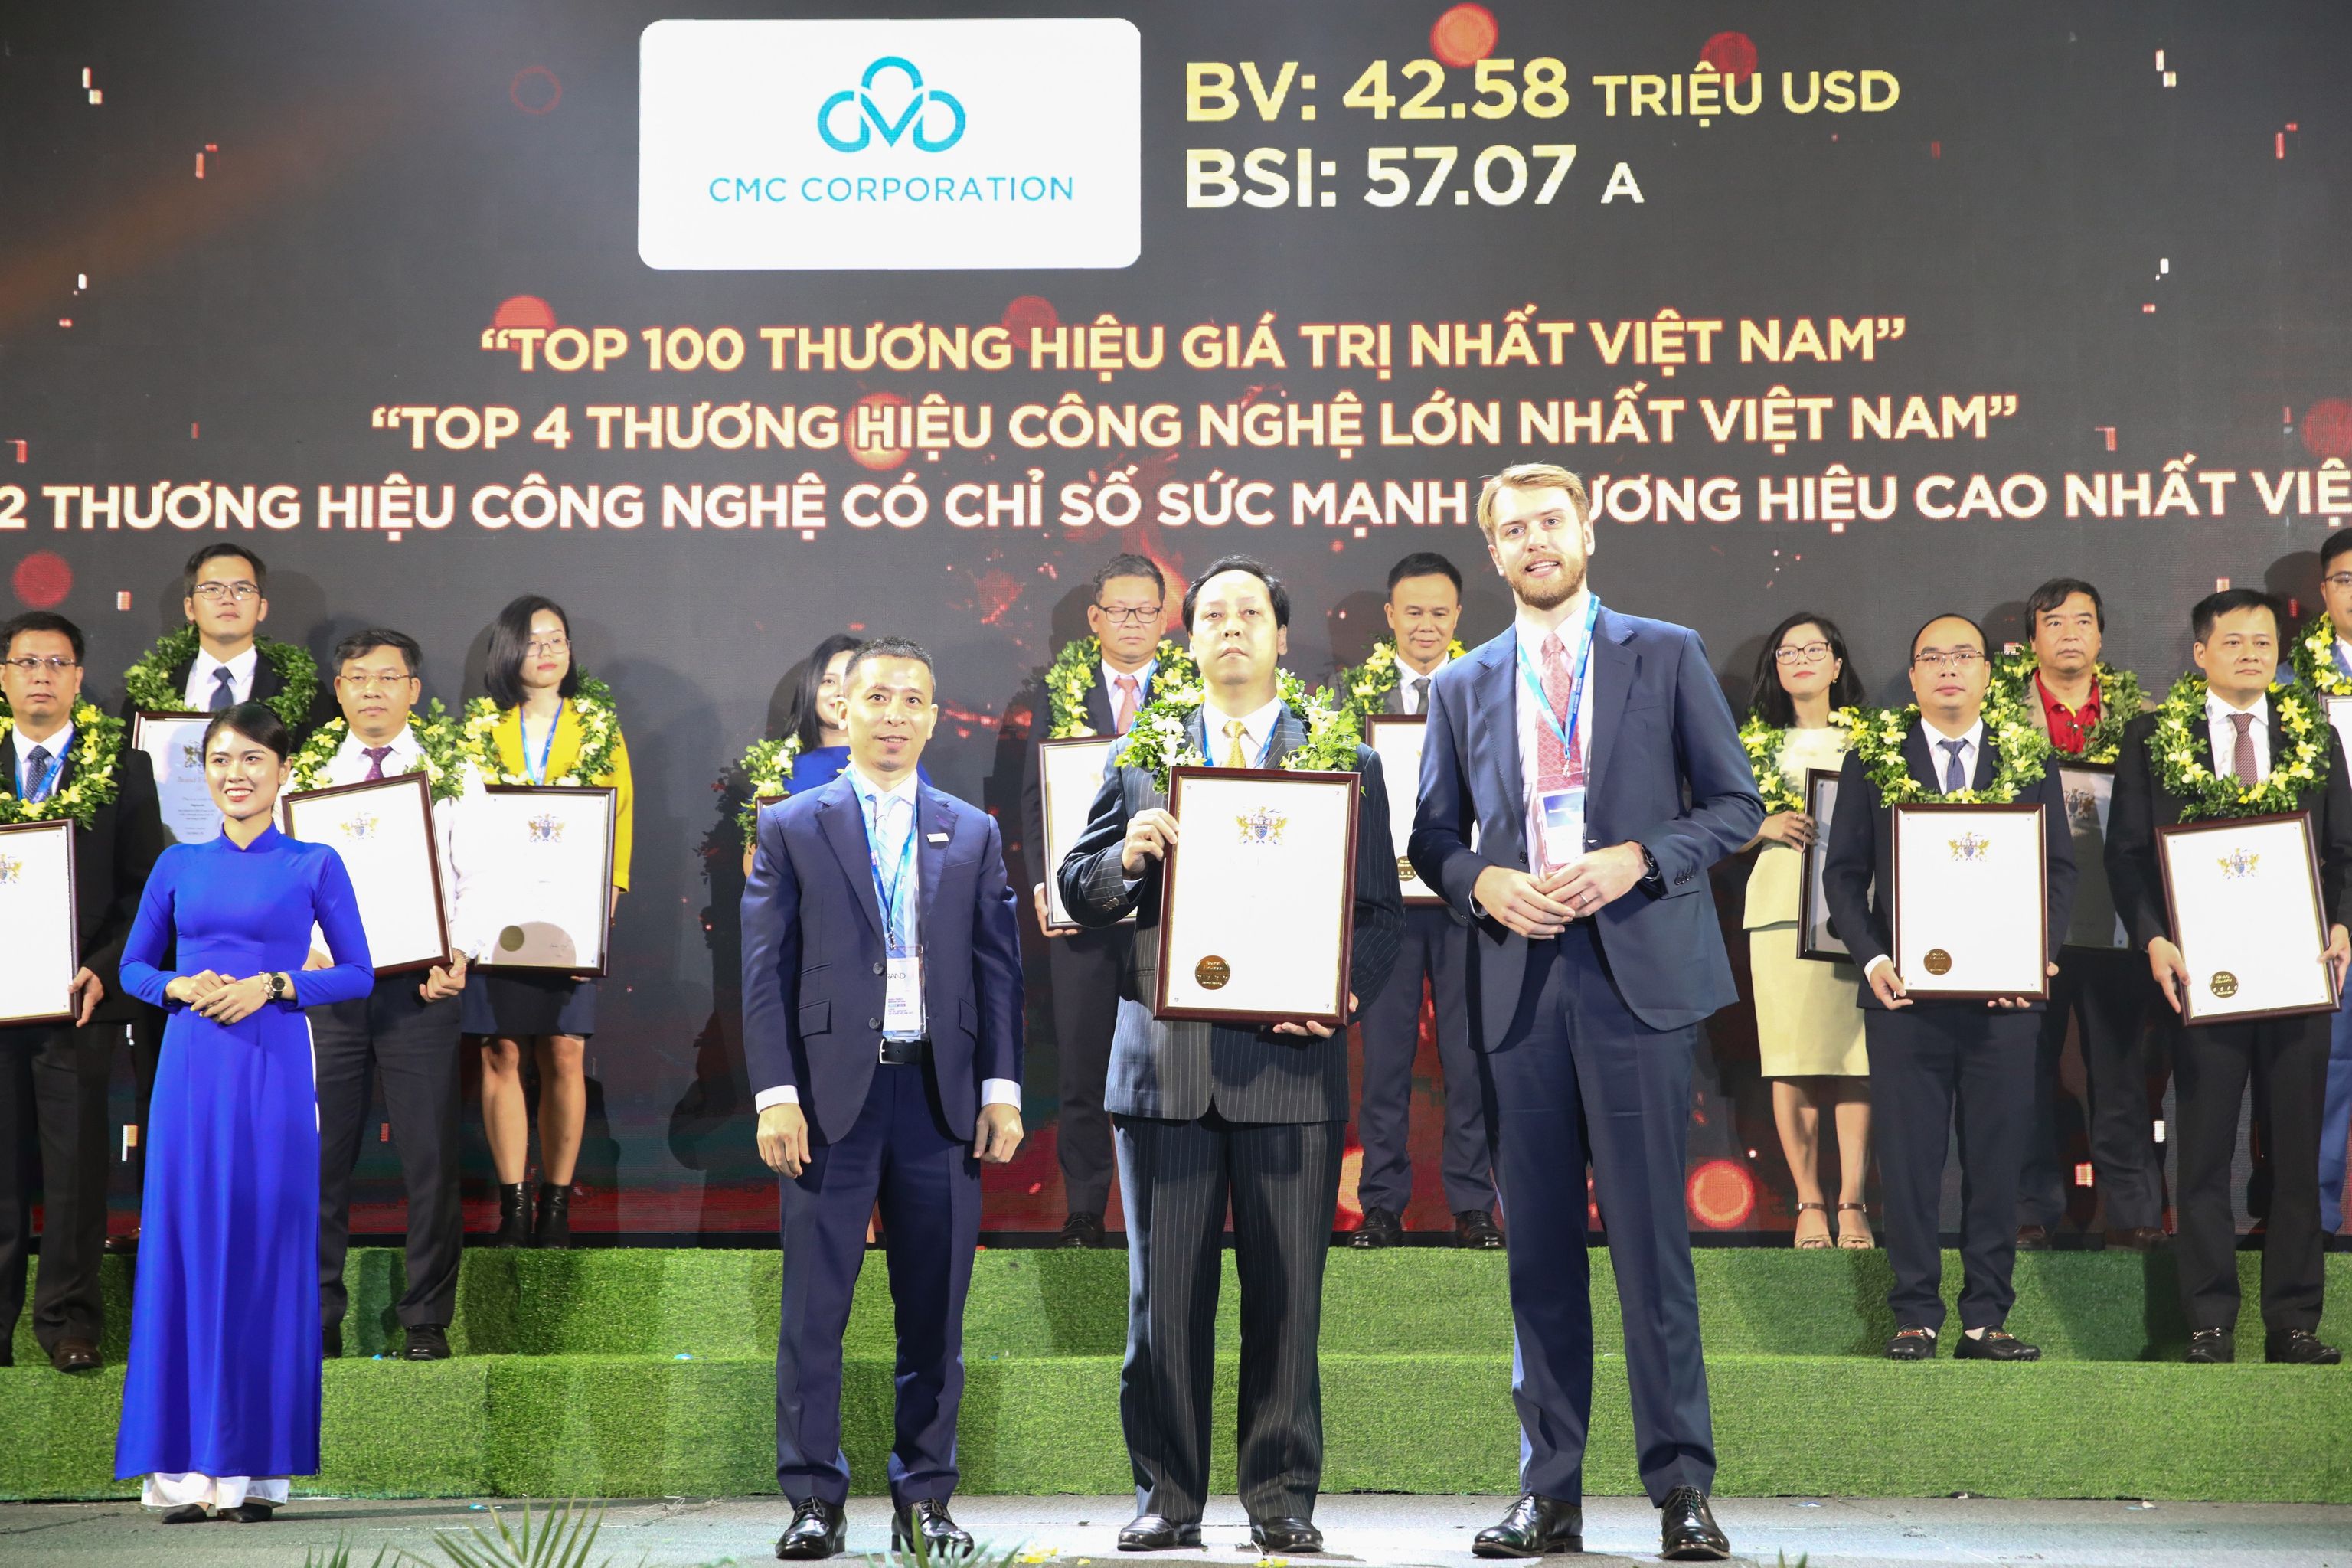 CMC rises to second place in ranking of technology brands with the highest brand strength index in Vietnam